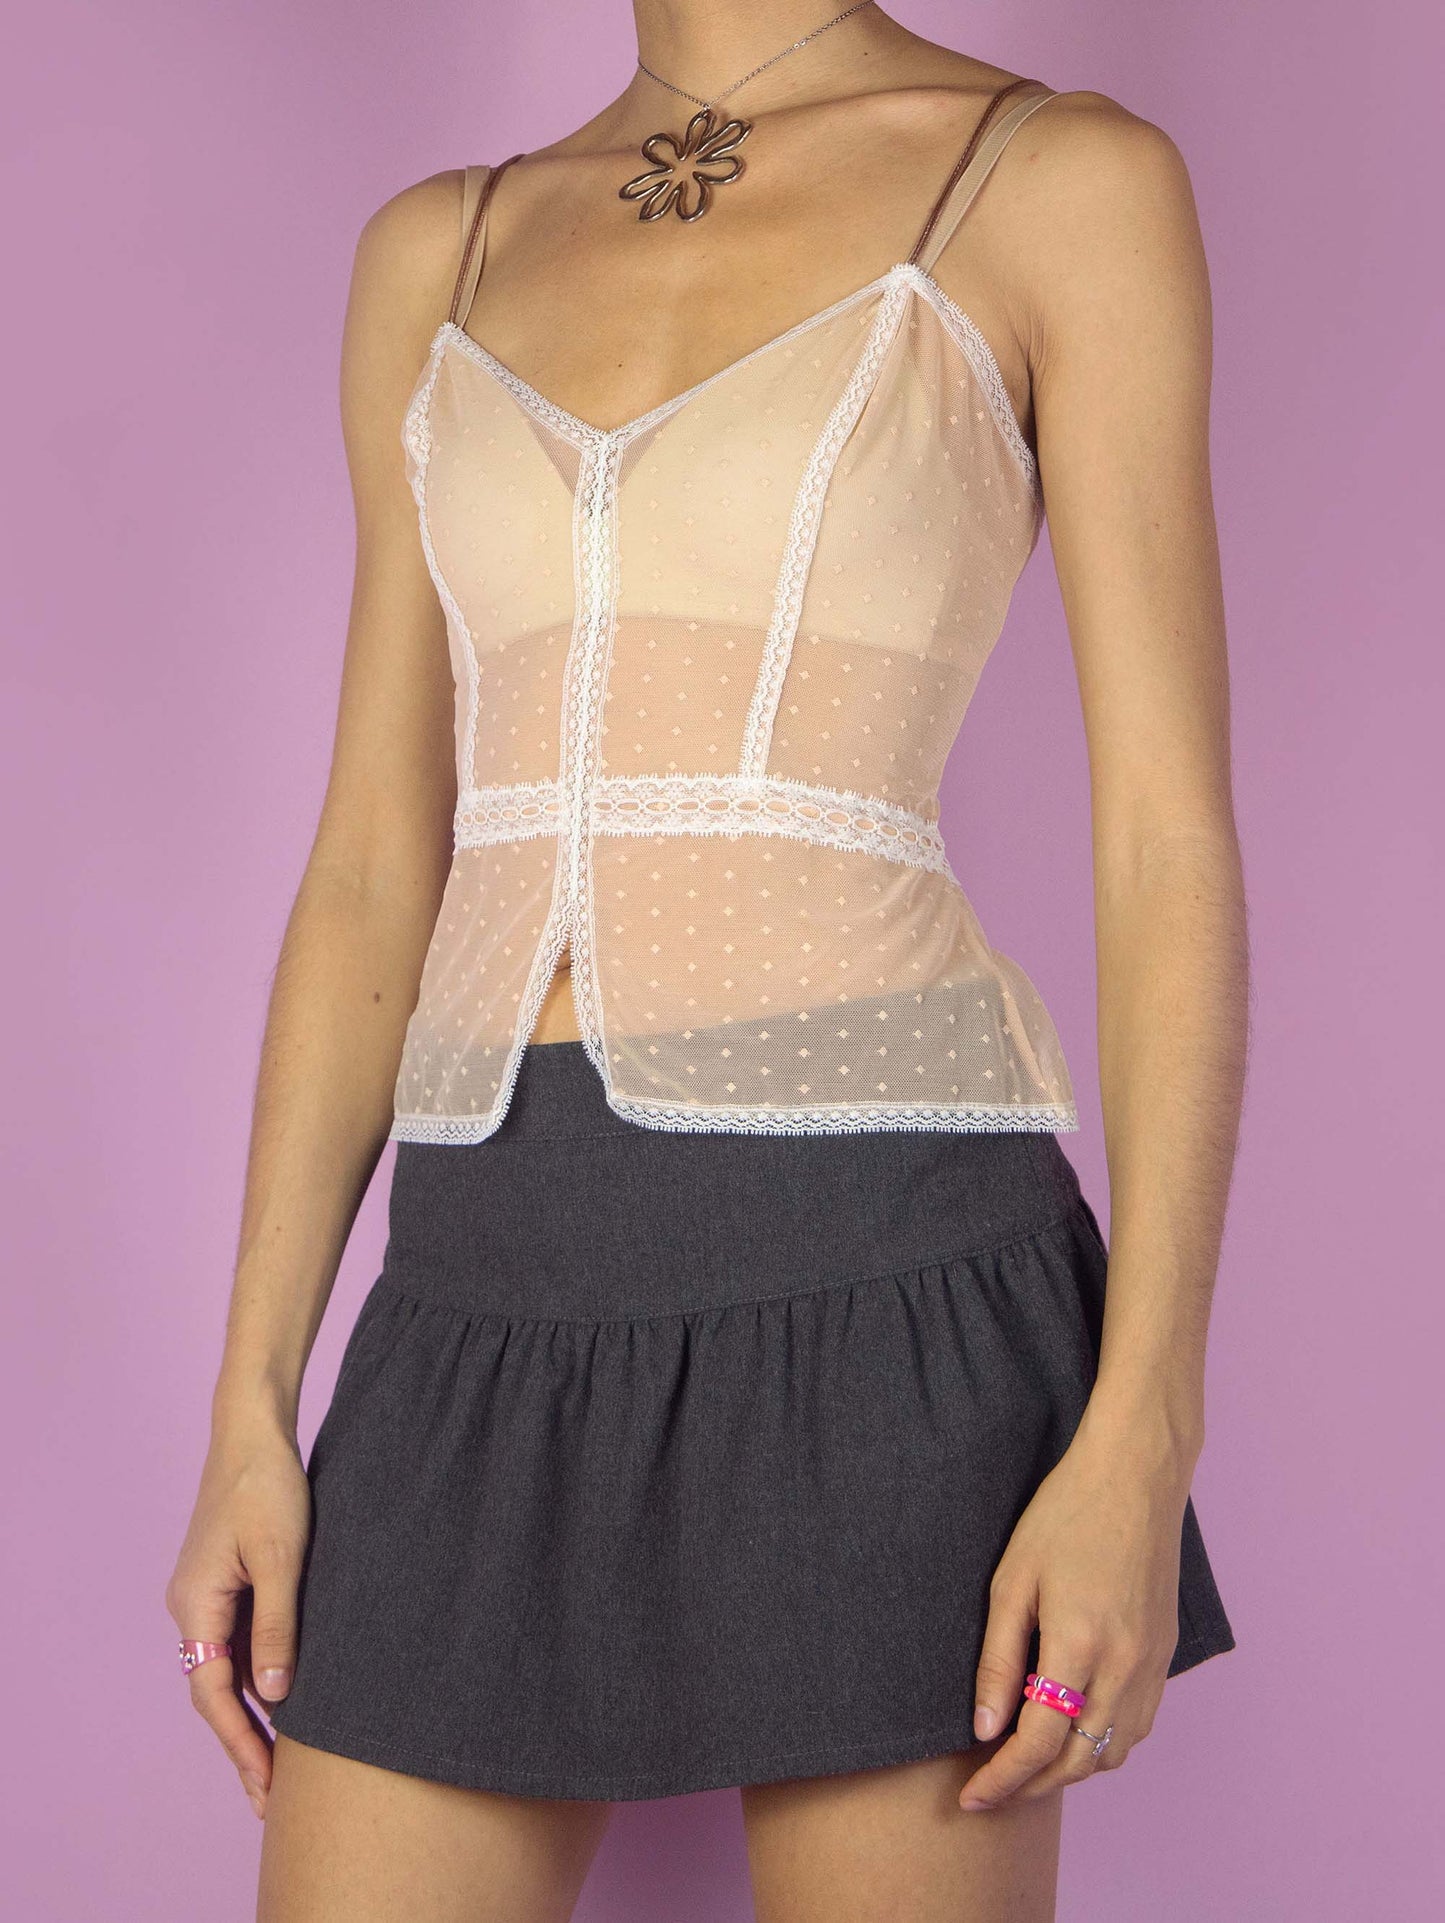 The Y2K Beige Mesh Cami Top is a vintage pink beige semi-sheer cami top with white lace details and spaghetti straps. Romantic coquette 2000s lingerie camisole. Excellent vintage condition.